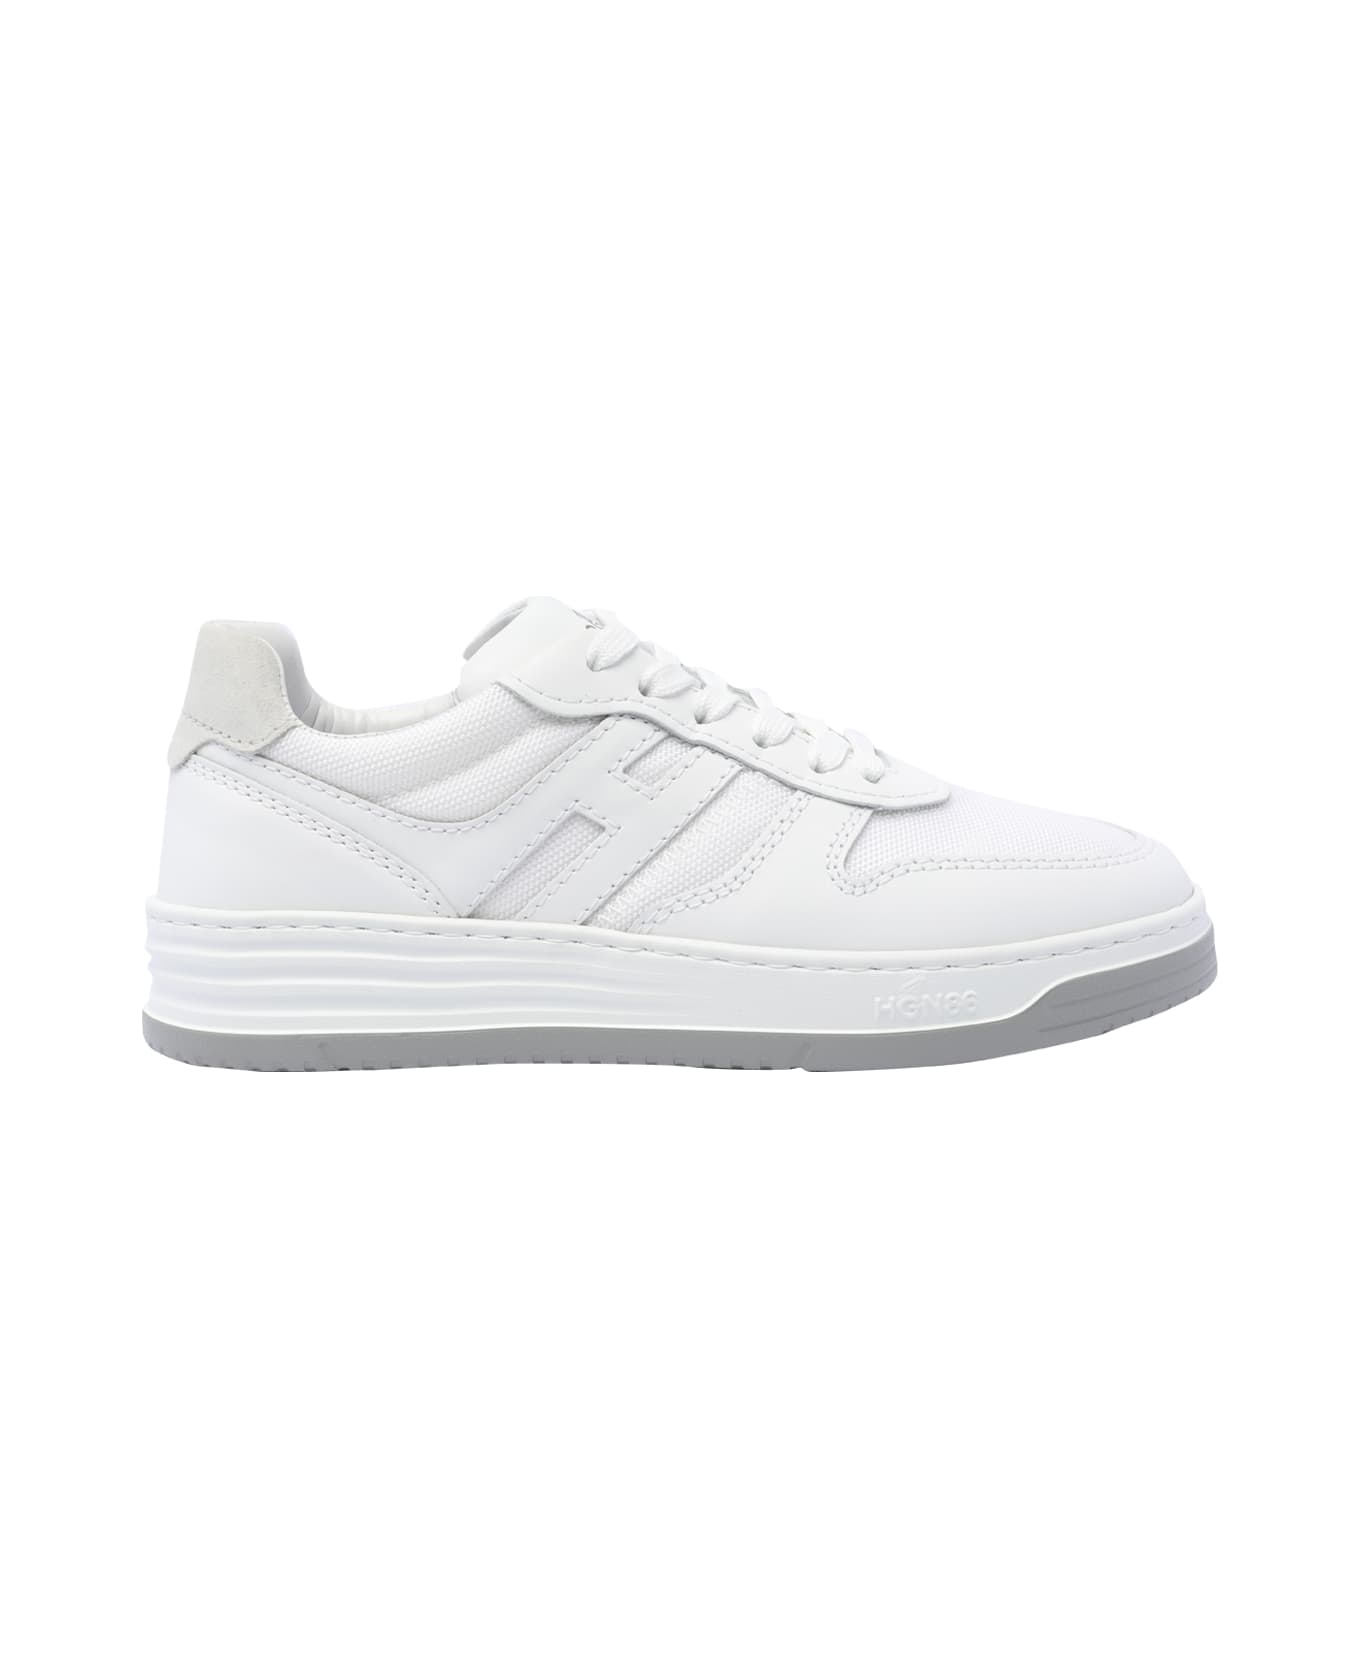 Hogan H630 Panelled Low-top Sneakers - White